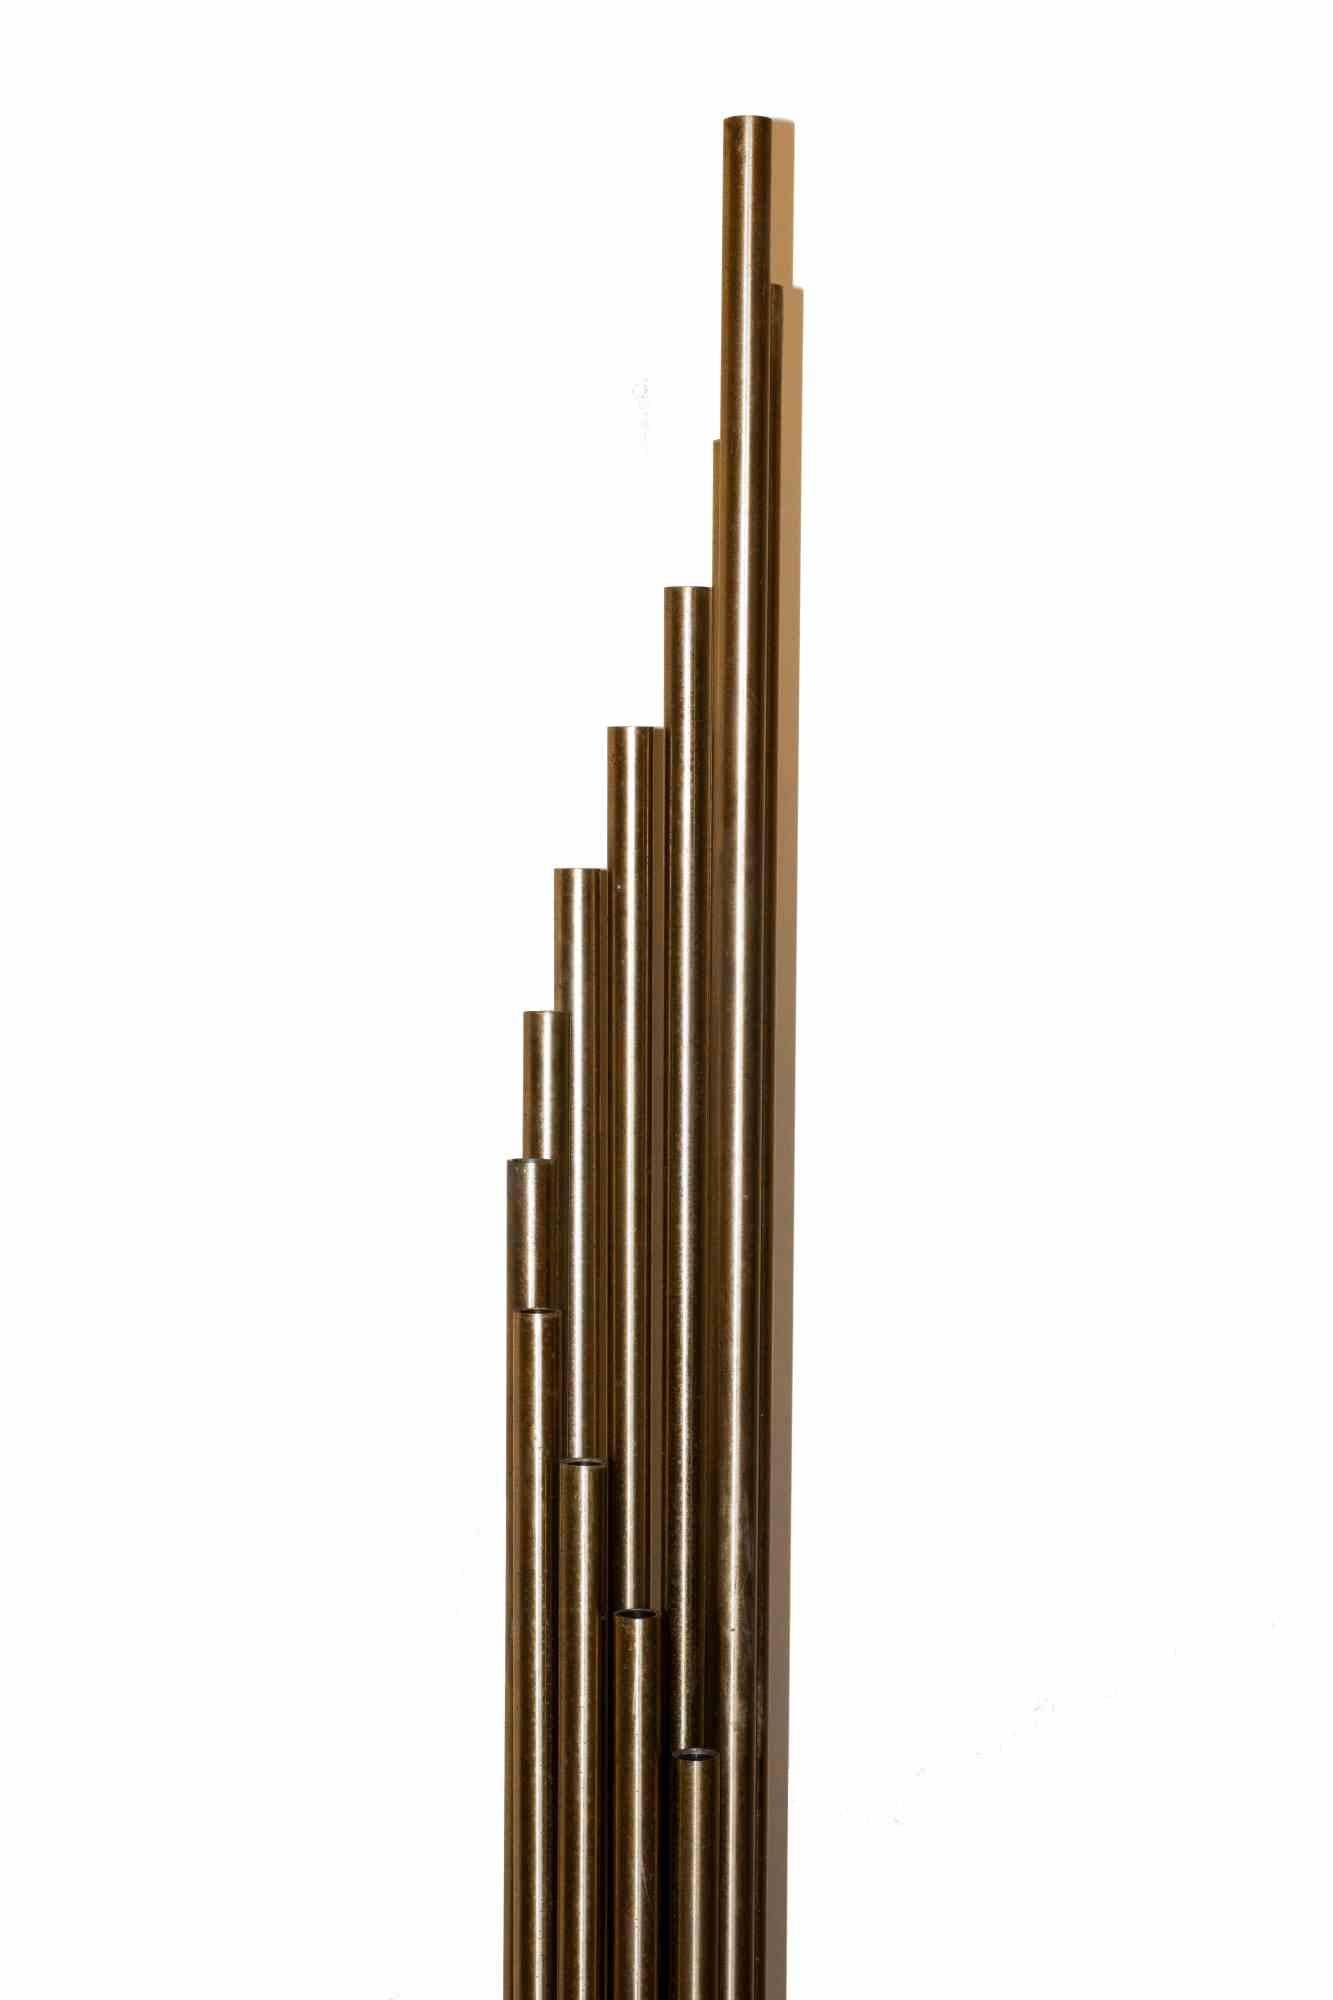 Organ lamp is an original contemporary Artwork realized in Italy in the 1970s by Goffredo Reggiani. 

Brass.

Made in Italy.

Created for Mobili nella Valle.

Total dimensions: 163 cm x 20 cm x 20 cm.

Perfect conditions.

Rare organ